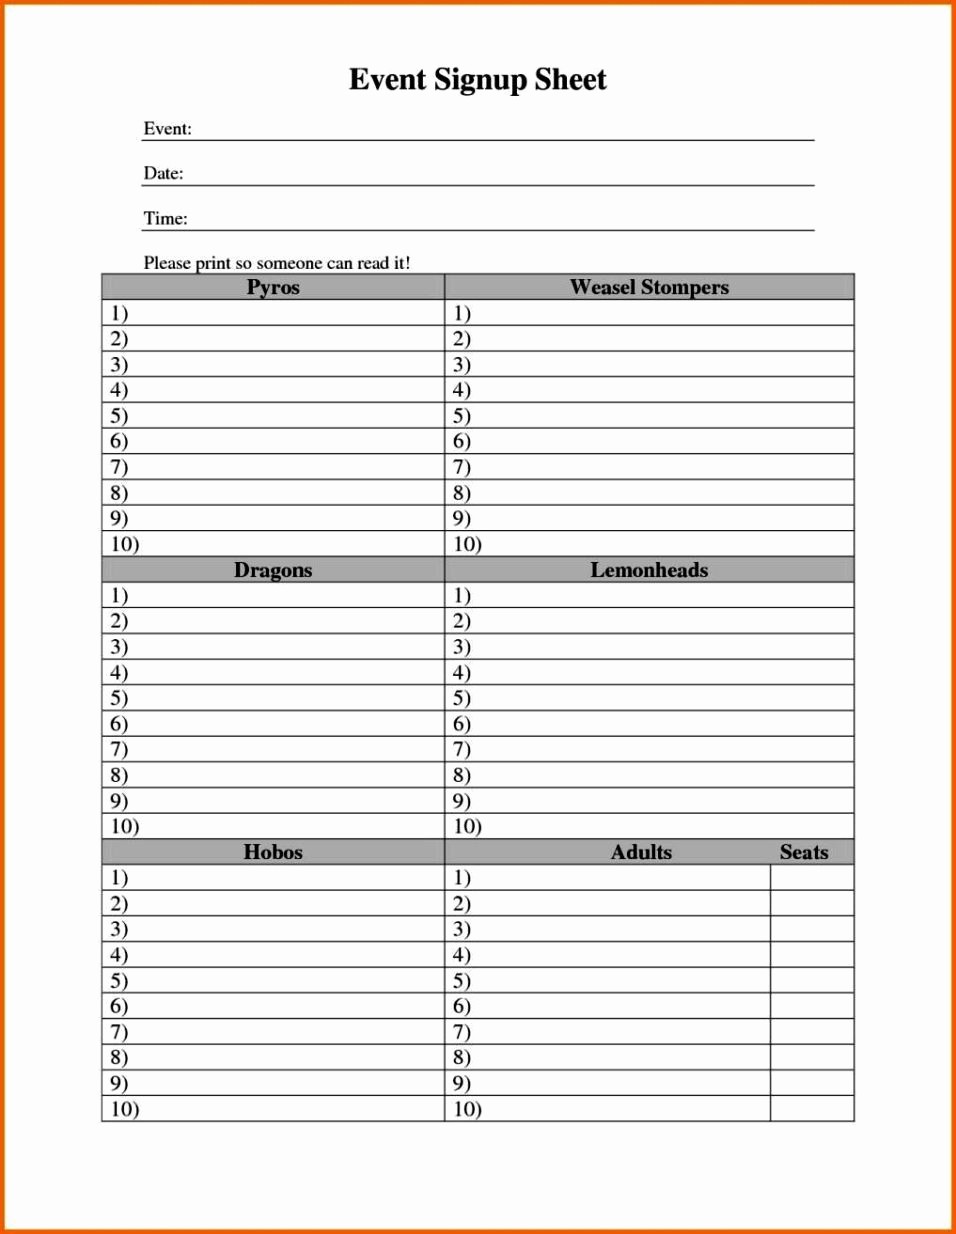 Weekly Sign In Sheet Template New Weekly Sign Up Sheet Template Sampletemplatess